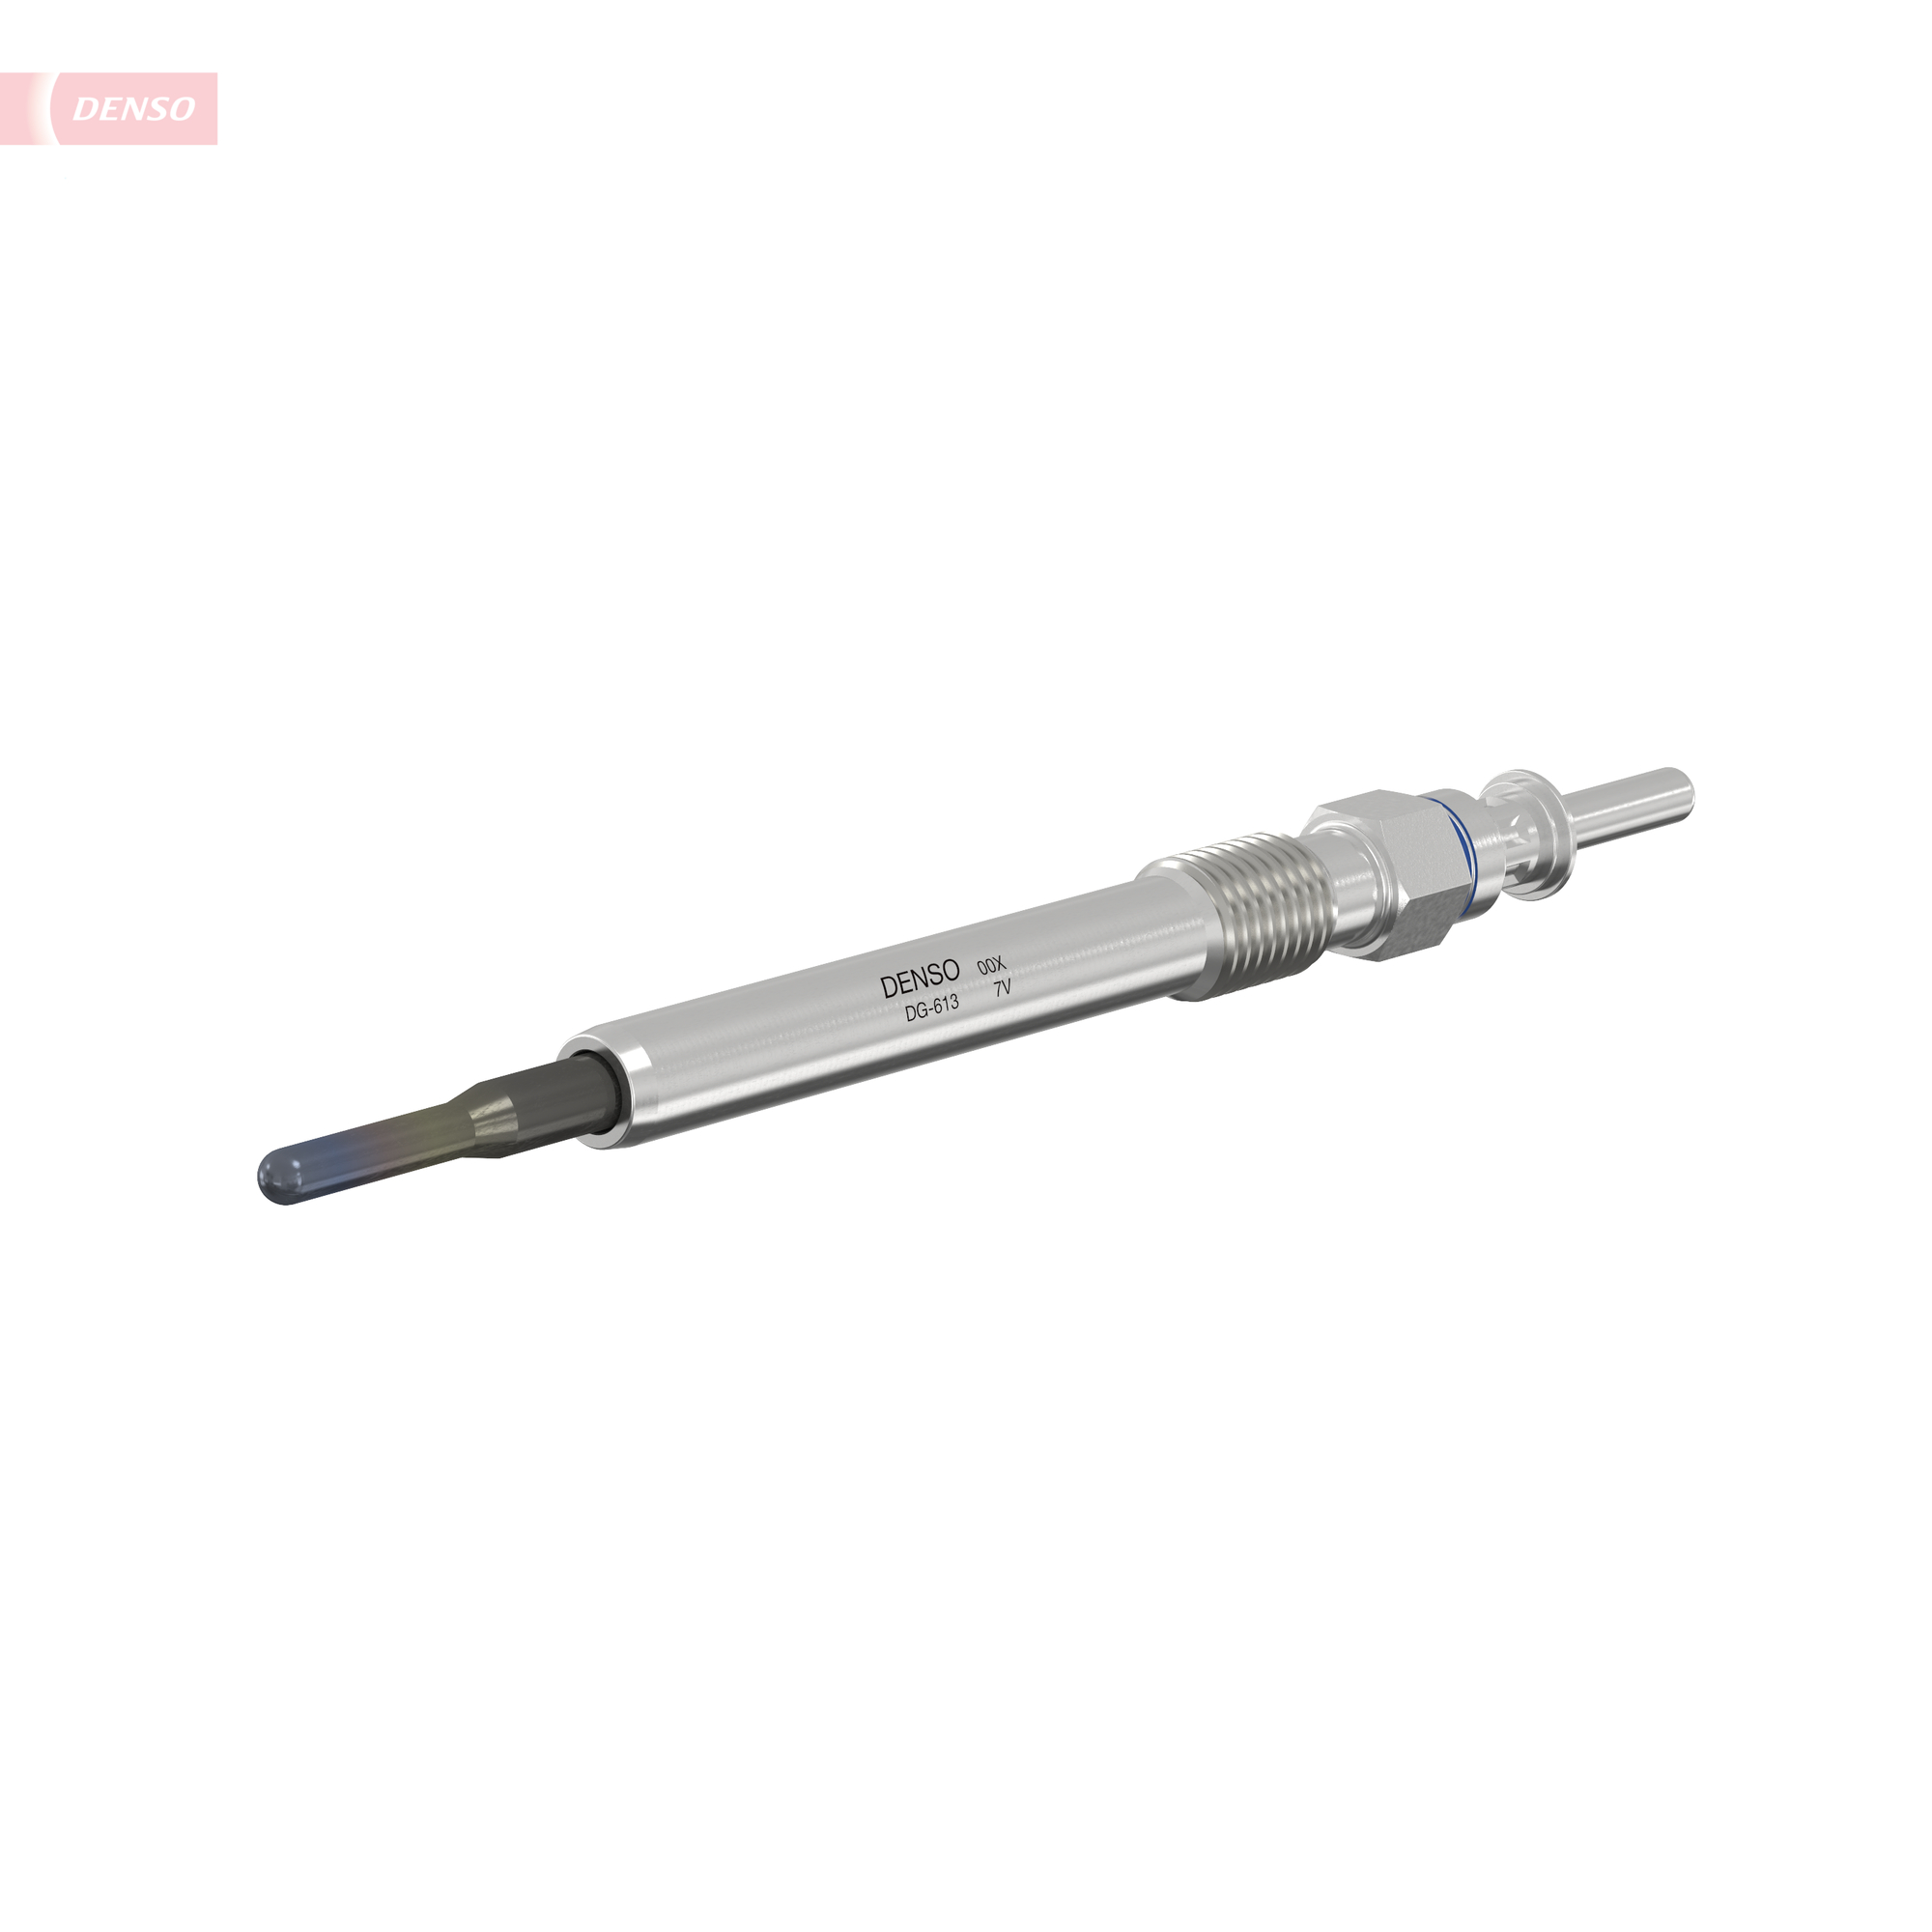 Picture of DENSO - DG-613 - Glow Plug (Glow Ignition System)